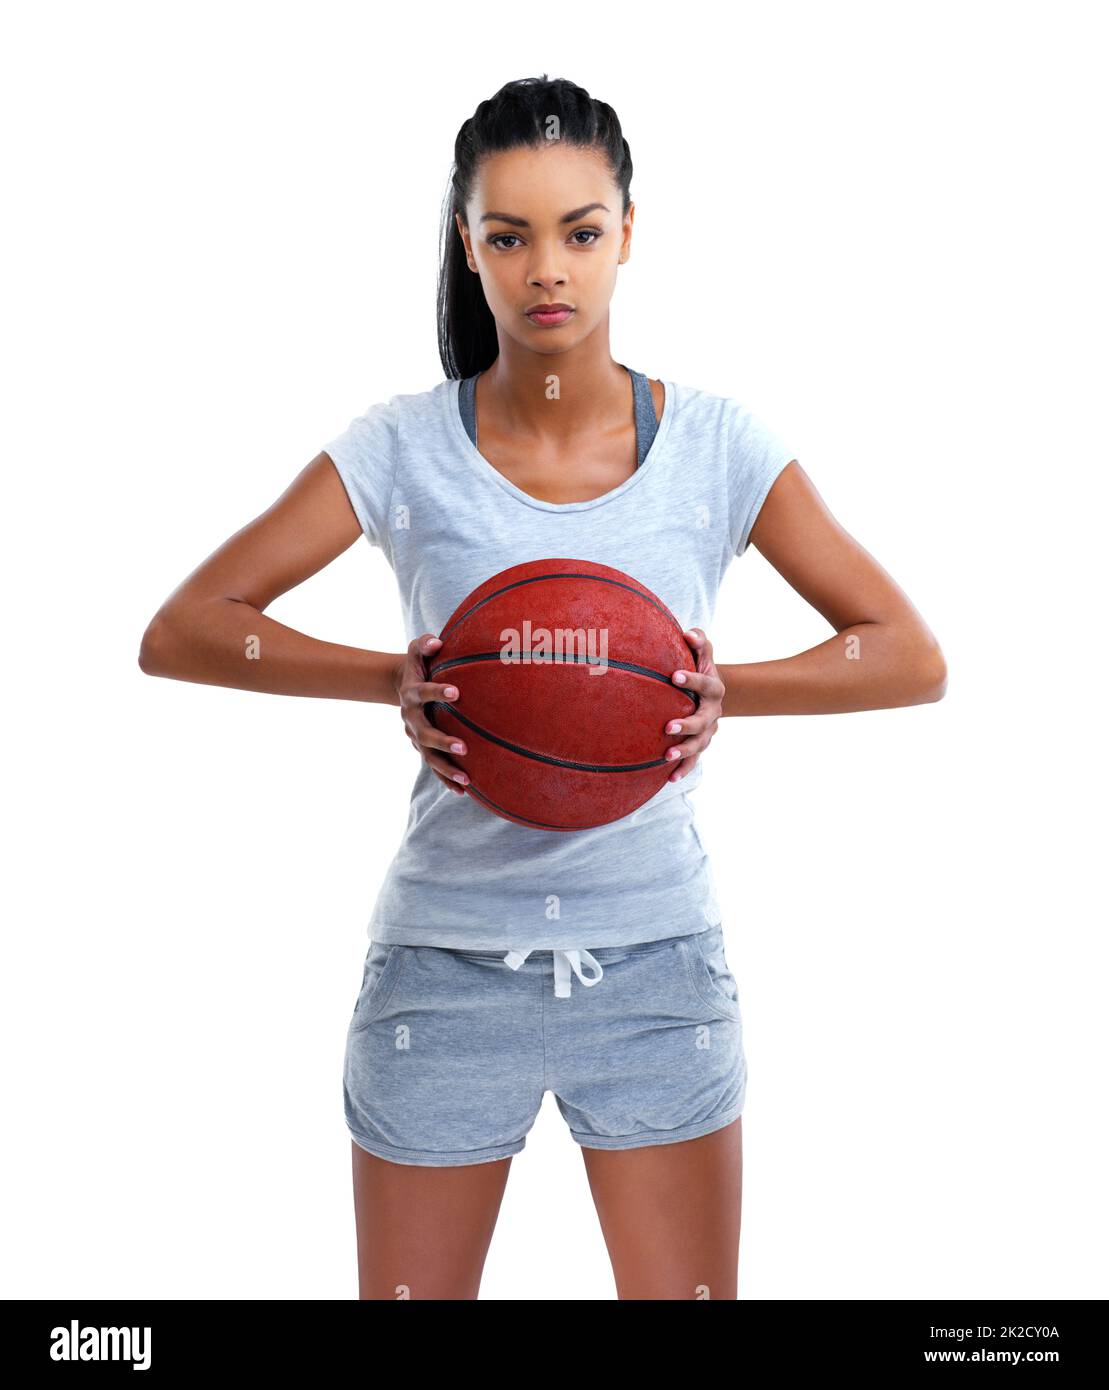 female basketball player looking up